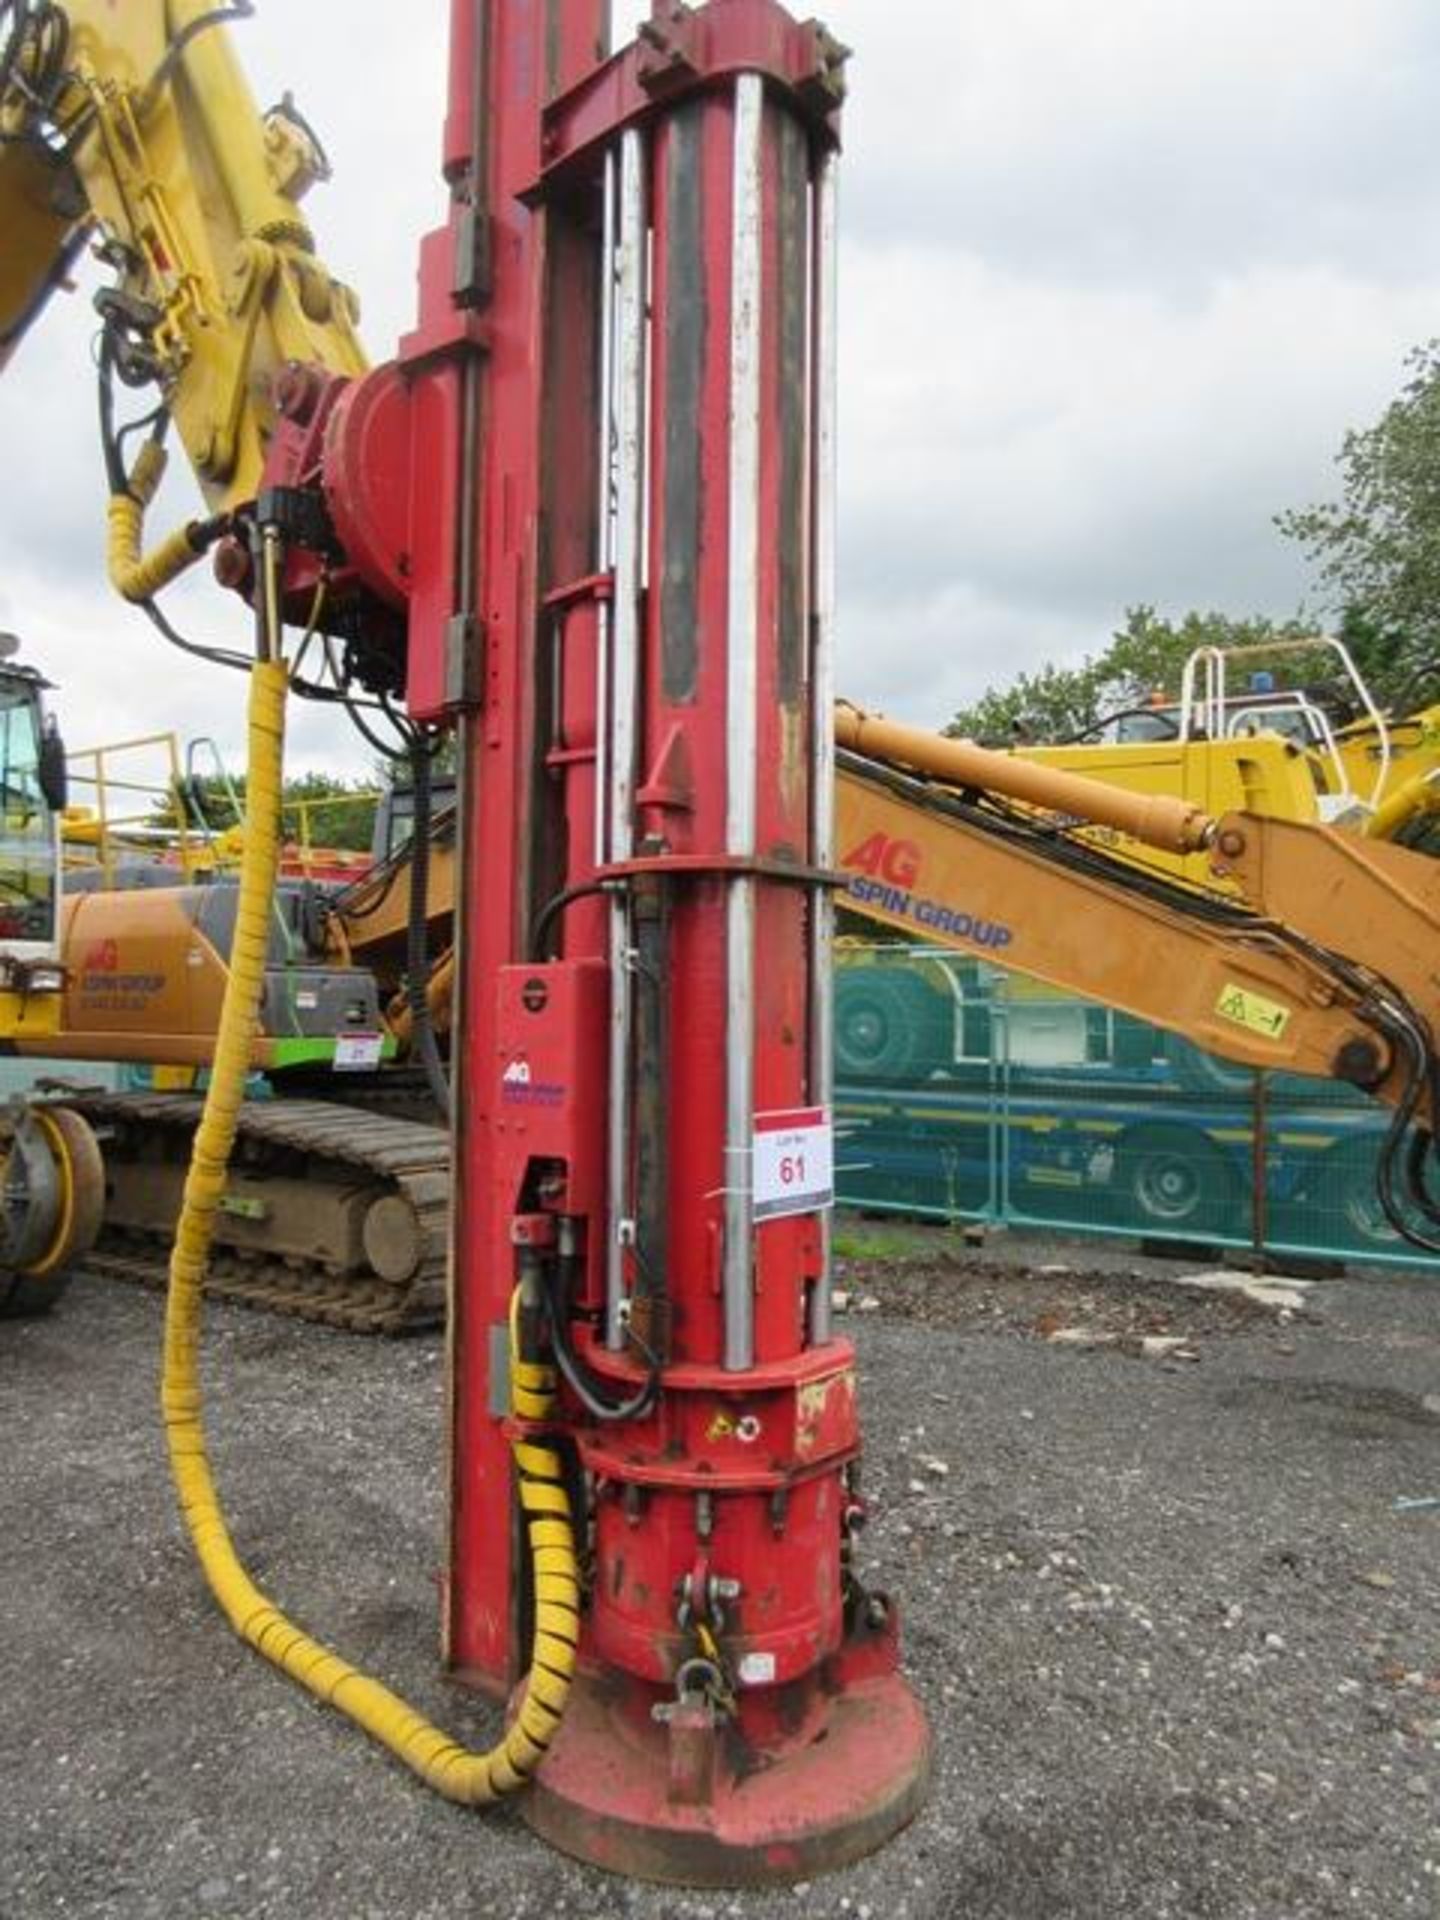 Fambo HR2750 hydraulic hammer with PR1100 leader s/n 227 (2015). Local Number FAMBO07 c/w control. - Image 3 of 8